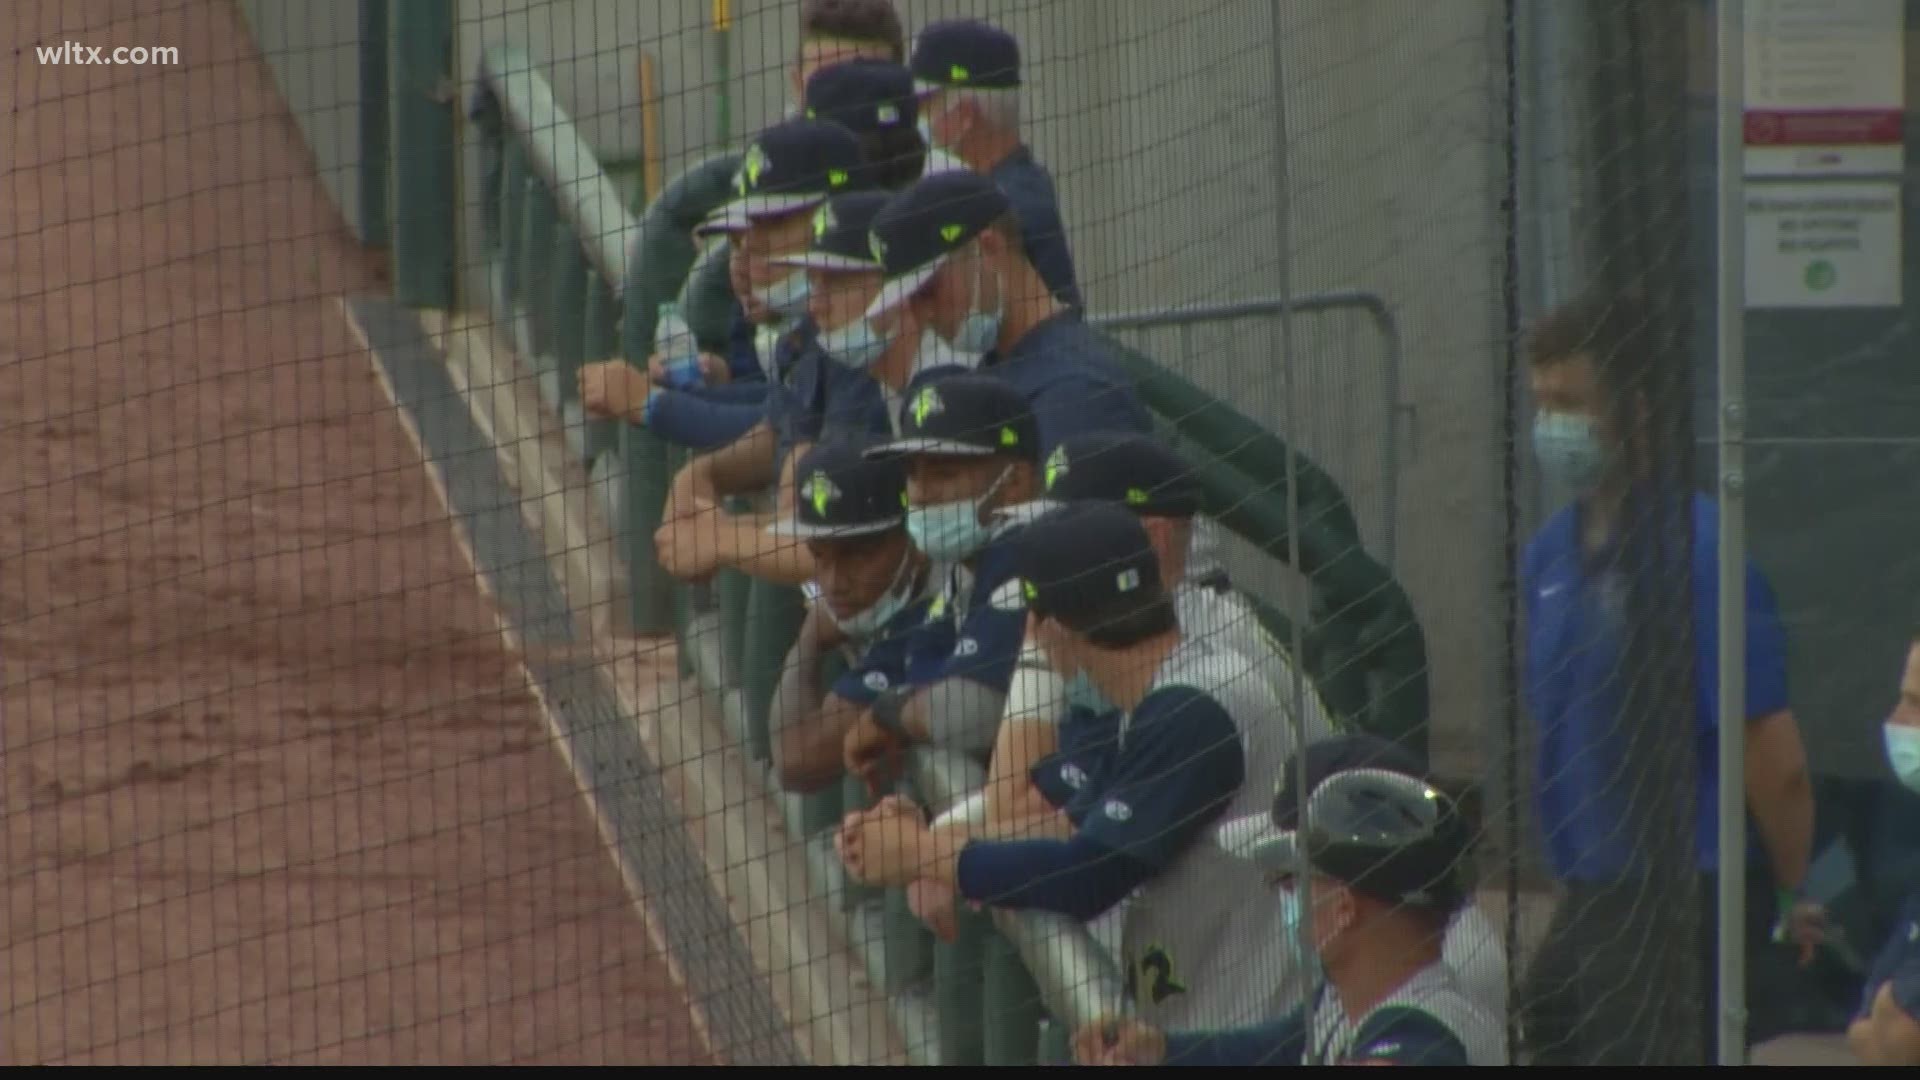 The Columbia Fireflies played their 2021 season opener in Augusta, their first contest in two years.